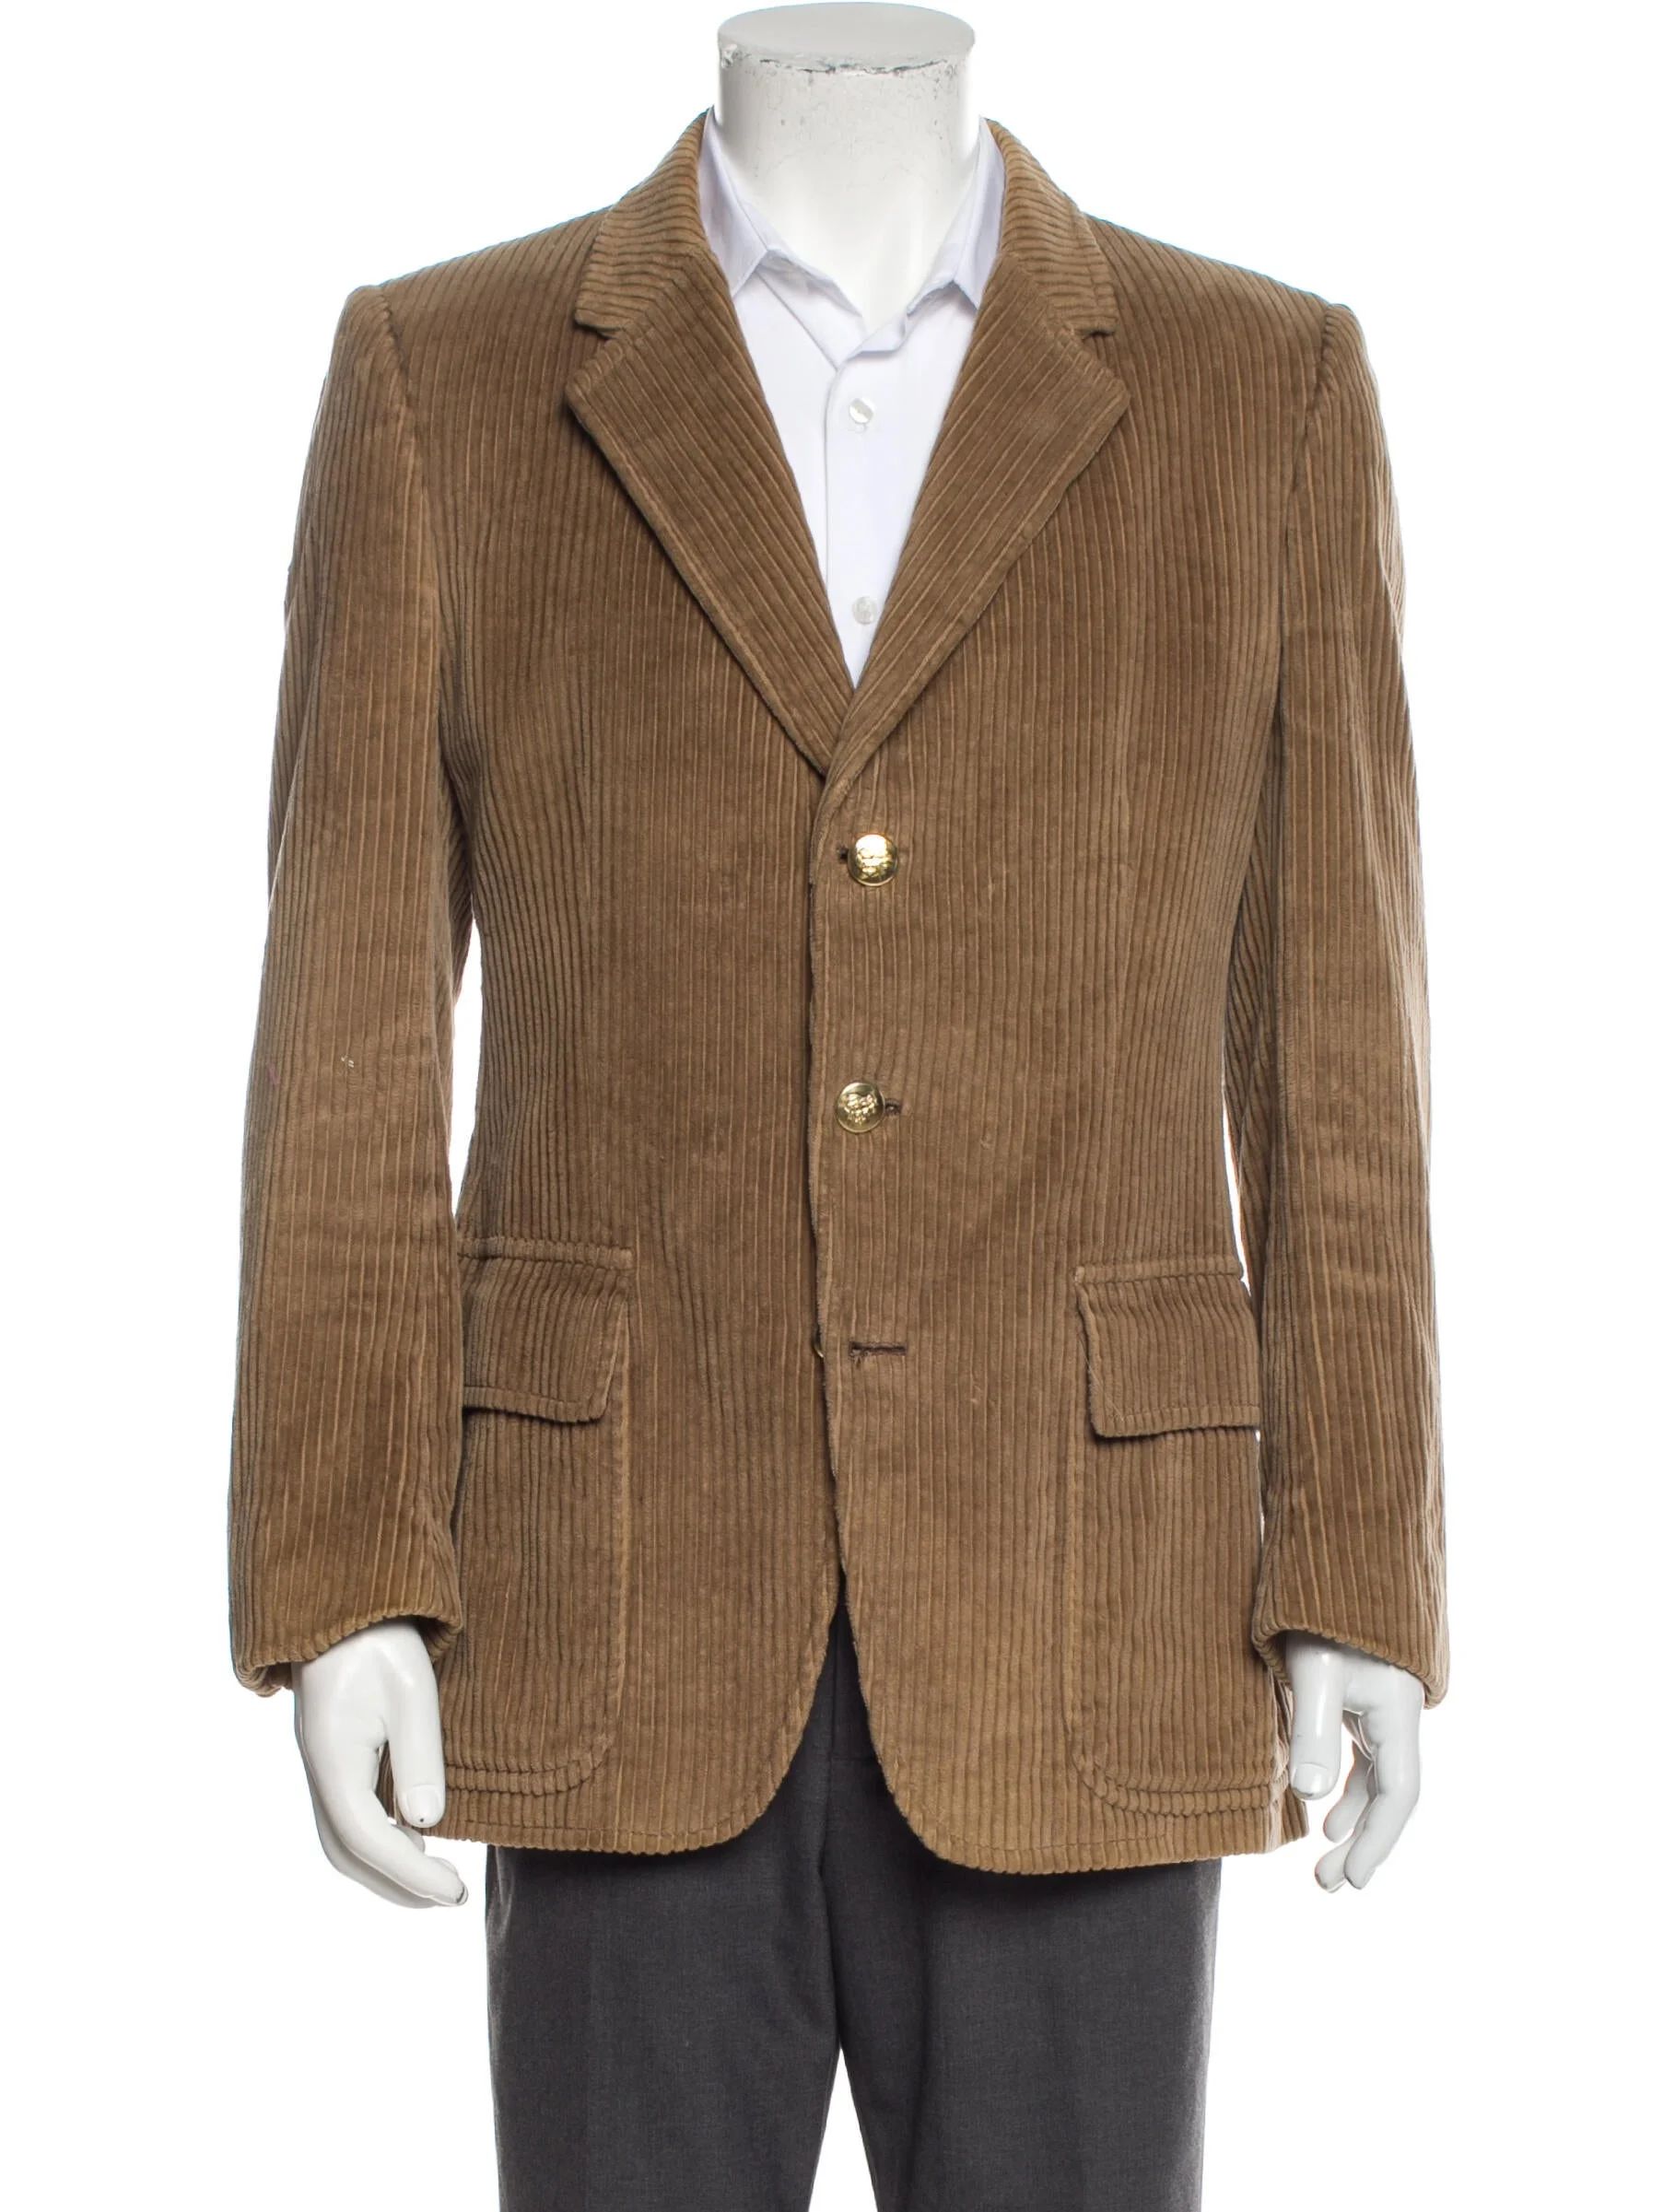 Vintage 1970's Sport Coat | The RealReal